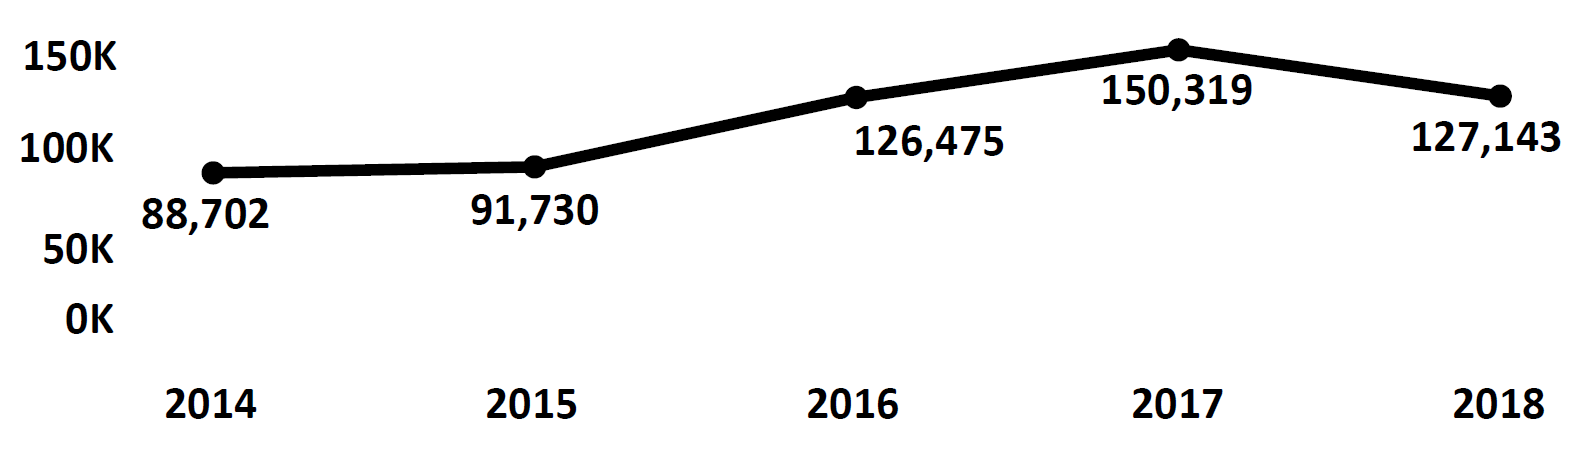 Graph of Do Not Call complaints recorded in Maryland from fiscal year 2014 to fiscal year 2018. In 2014 there were 88,702 complaints filed, which increased each year peaking at 150,319 in 2017. In 2018 there were 127,143 complaints filed, fewer than 2017.